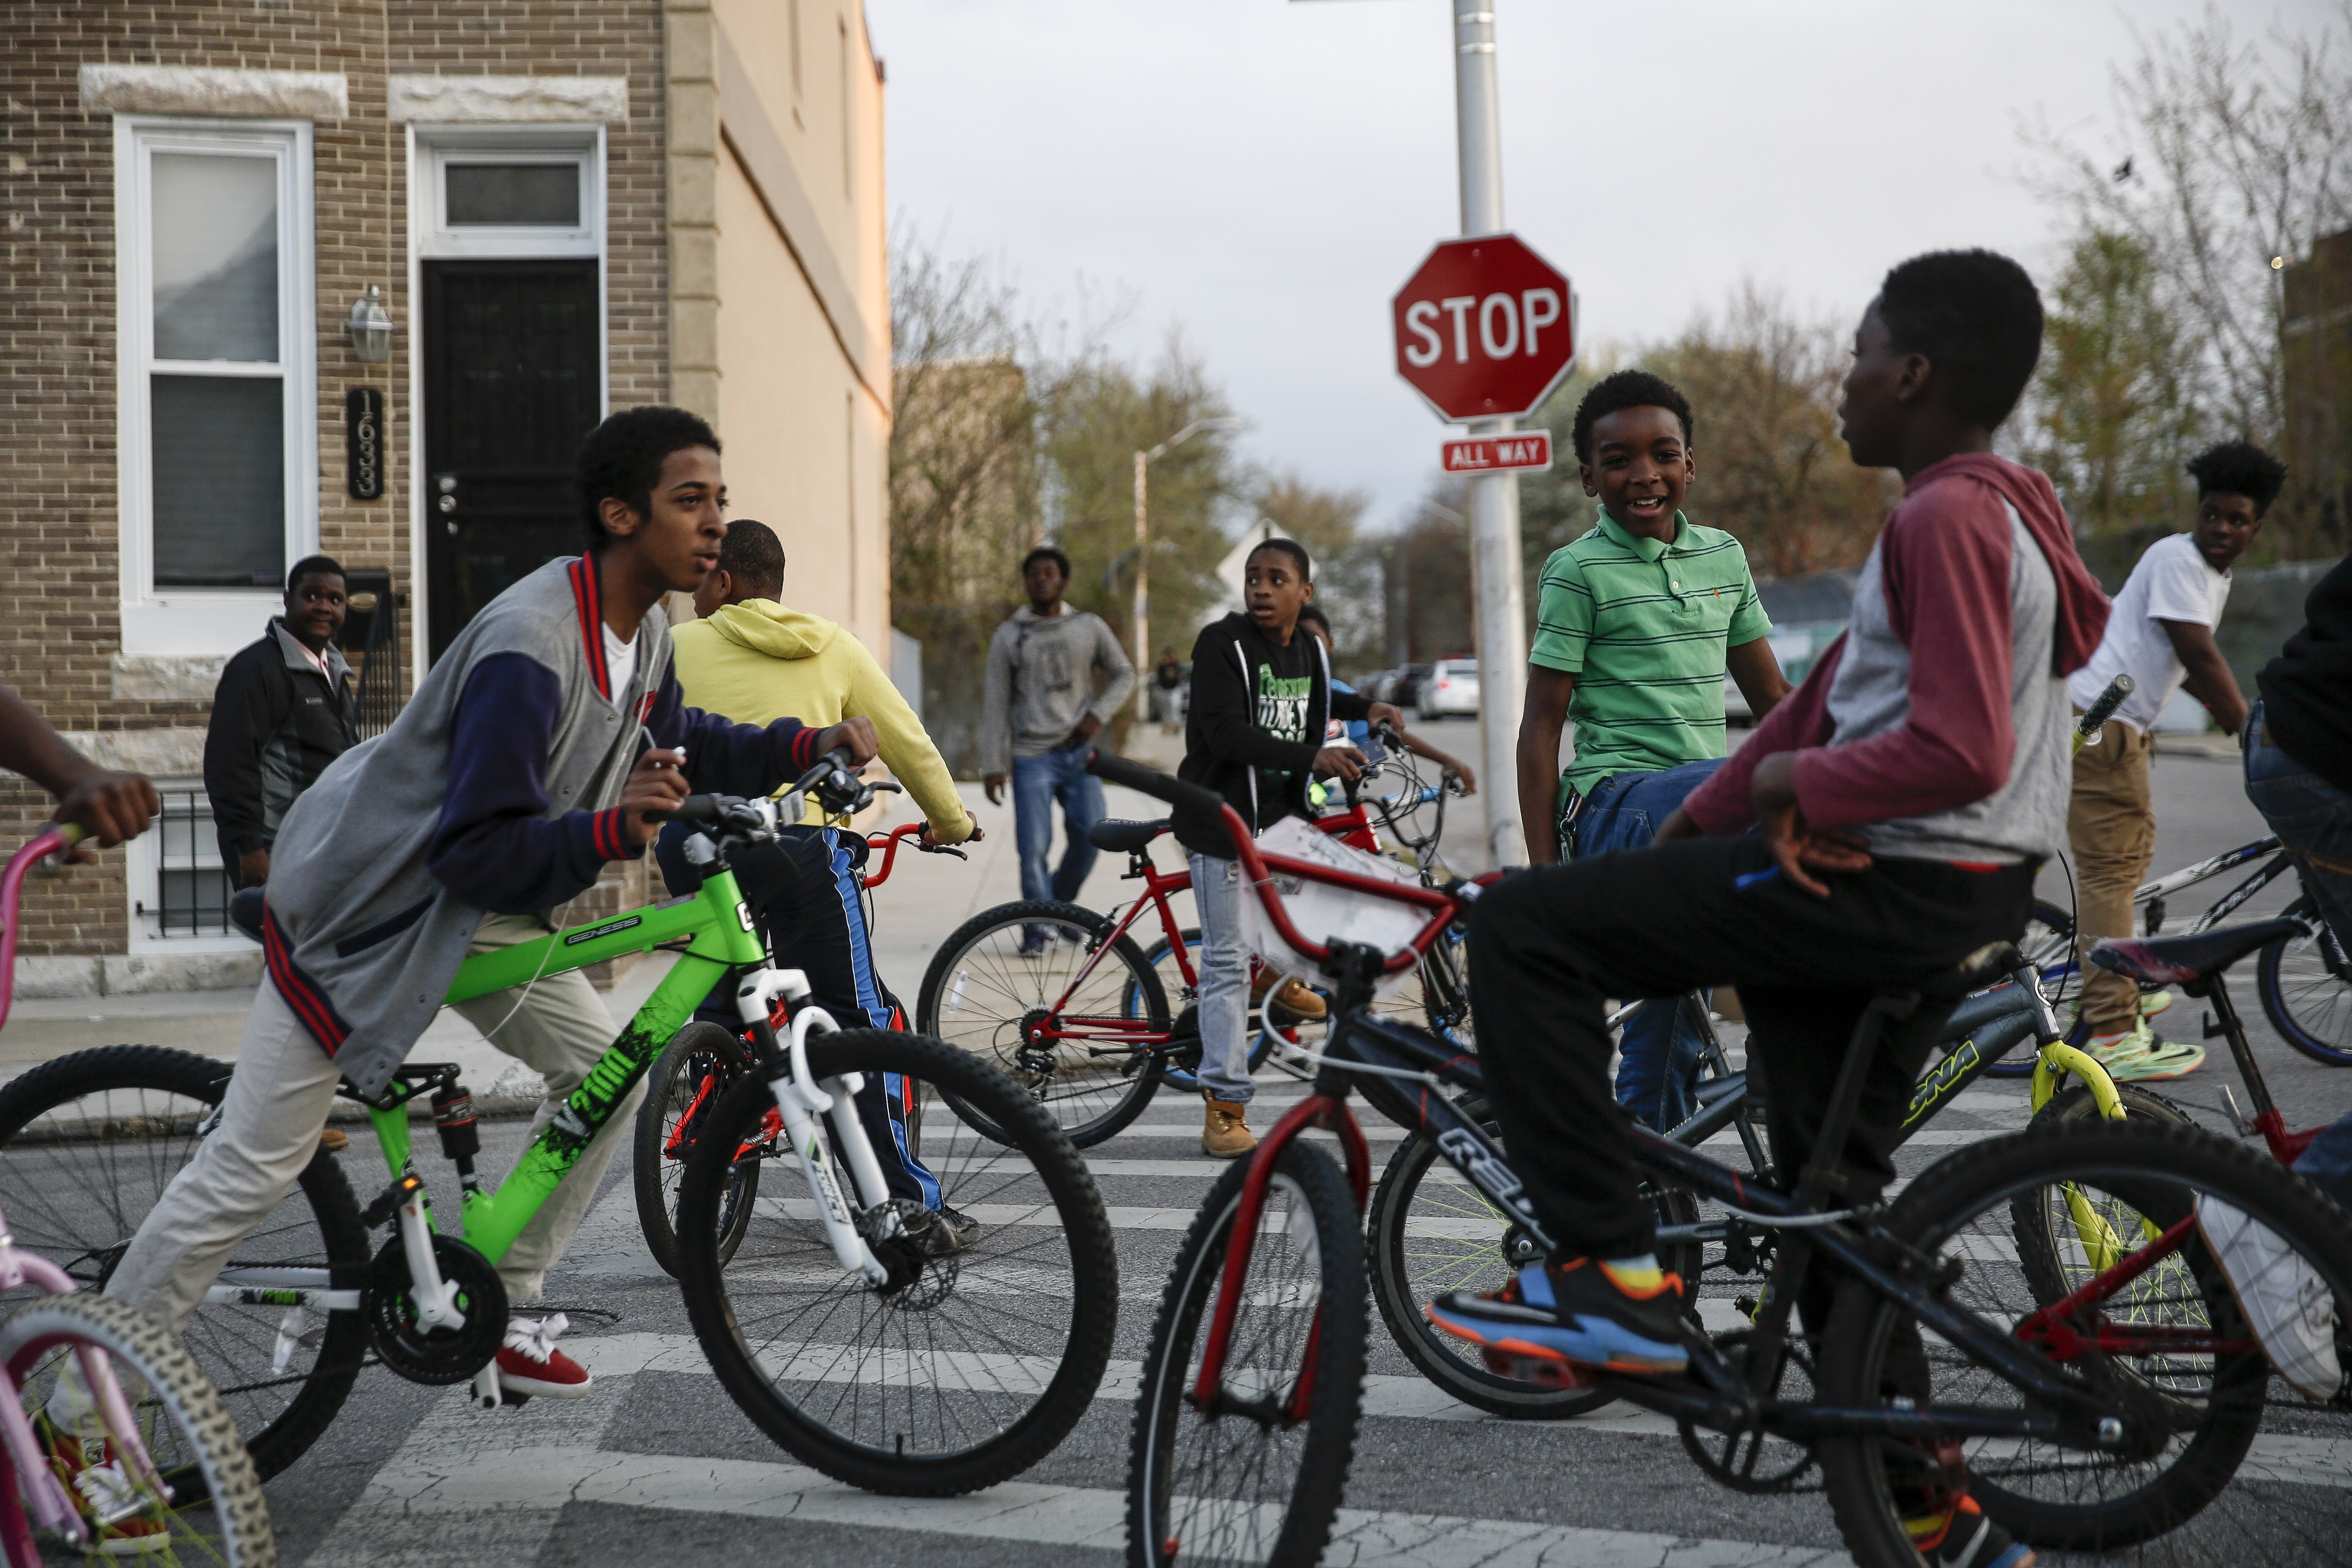 Children riding bikes look on as protesters march on Laurens Street in Baltimore on April 21, 2015.